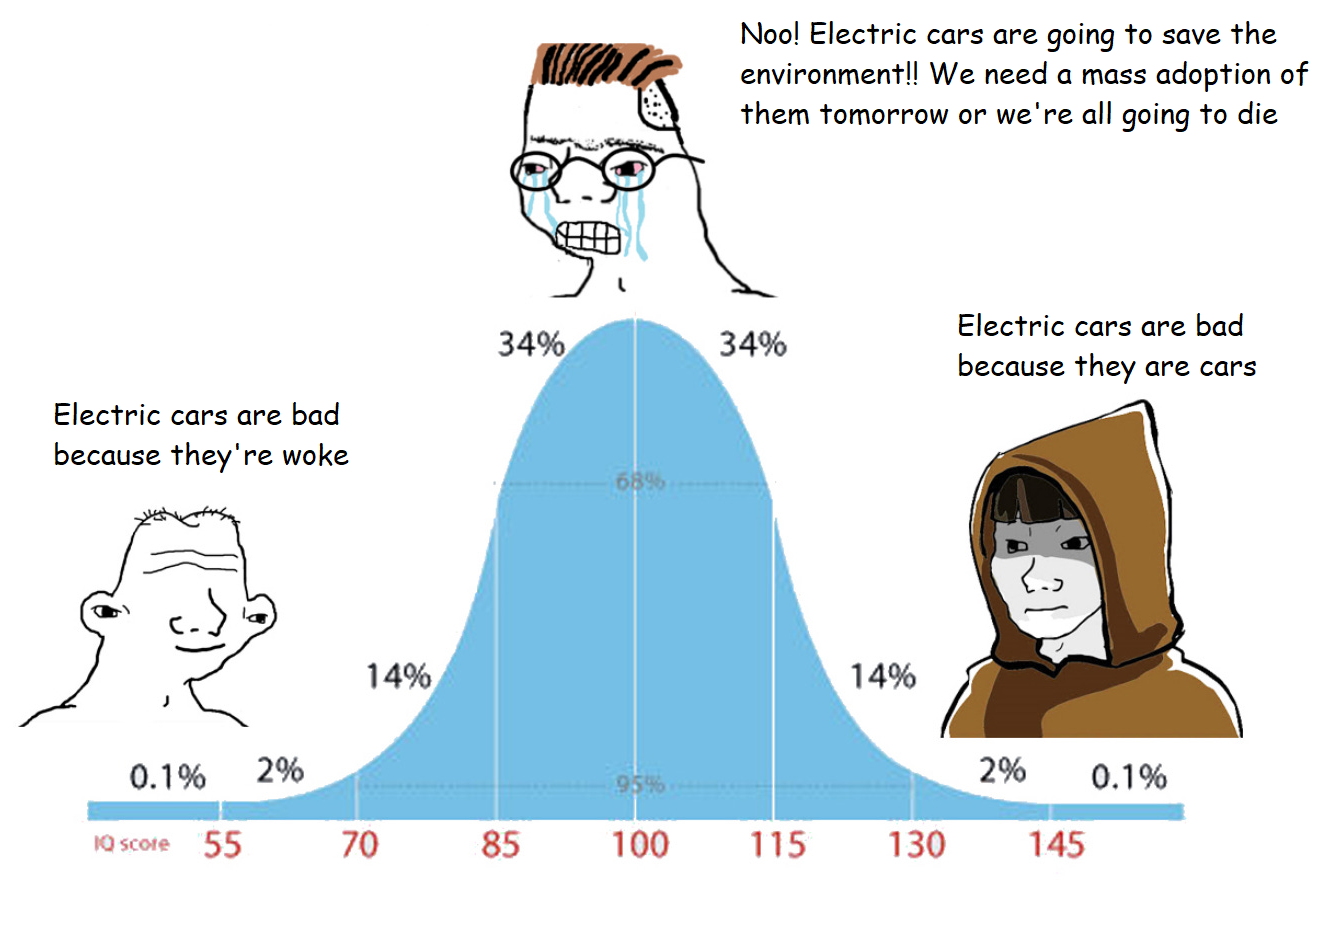 Bell curve meme. Low: "Electric cars are bad because they are woke" Mid: "NO! Electric cars are good! We need mass adoption of them or we're all going to die!" High: "Electric cars are bad because they are cars"